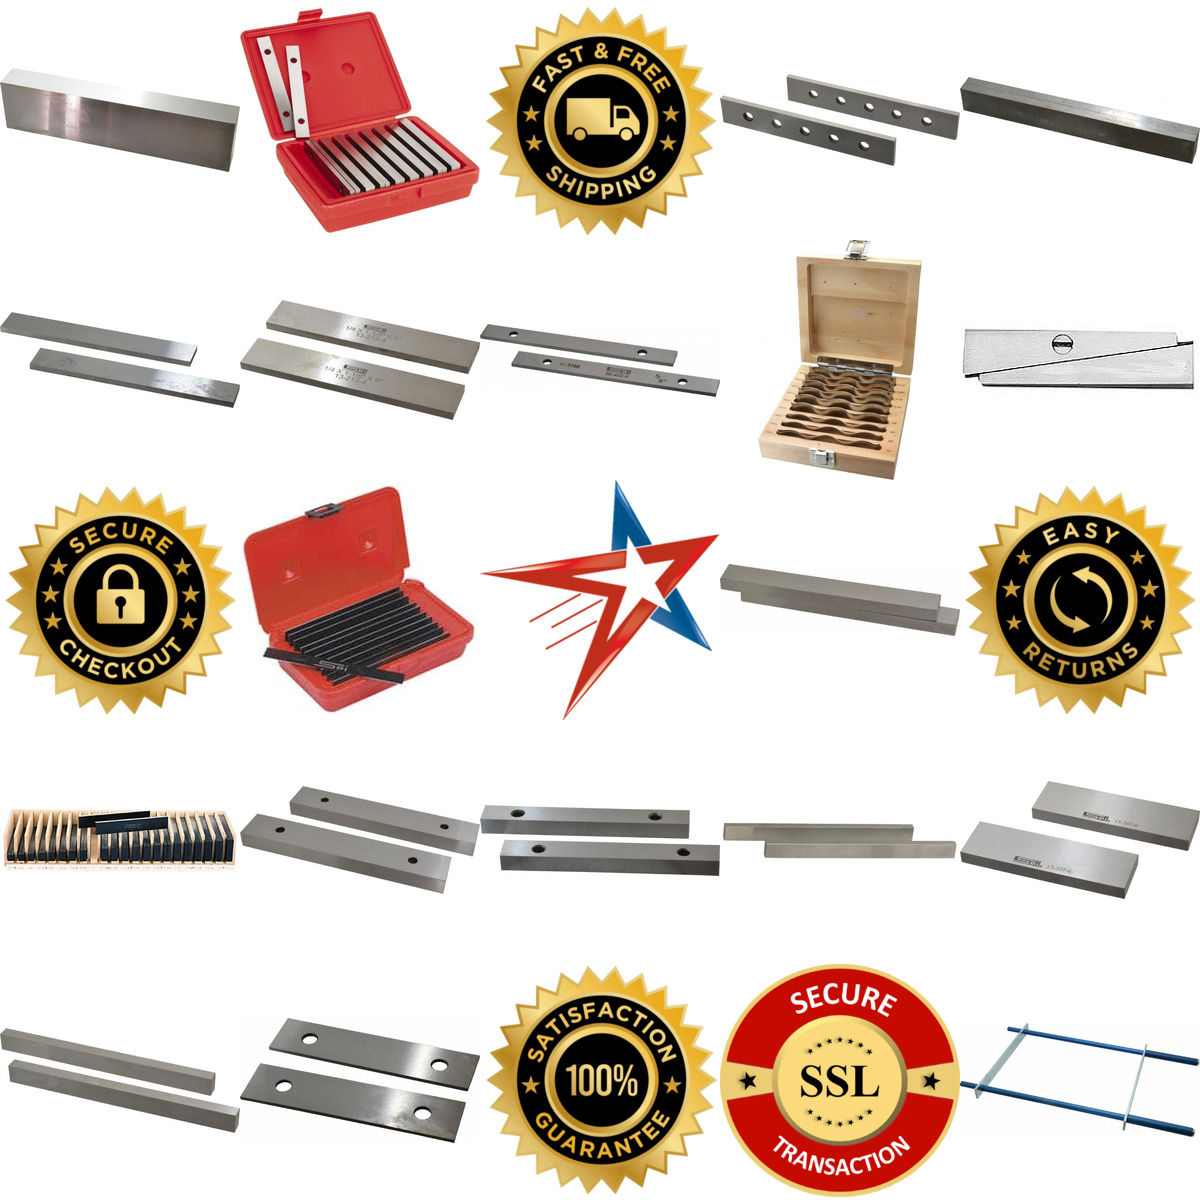 A selection of Parallels and Sets products on GoVets